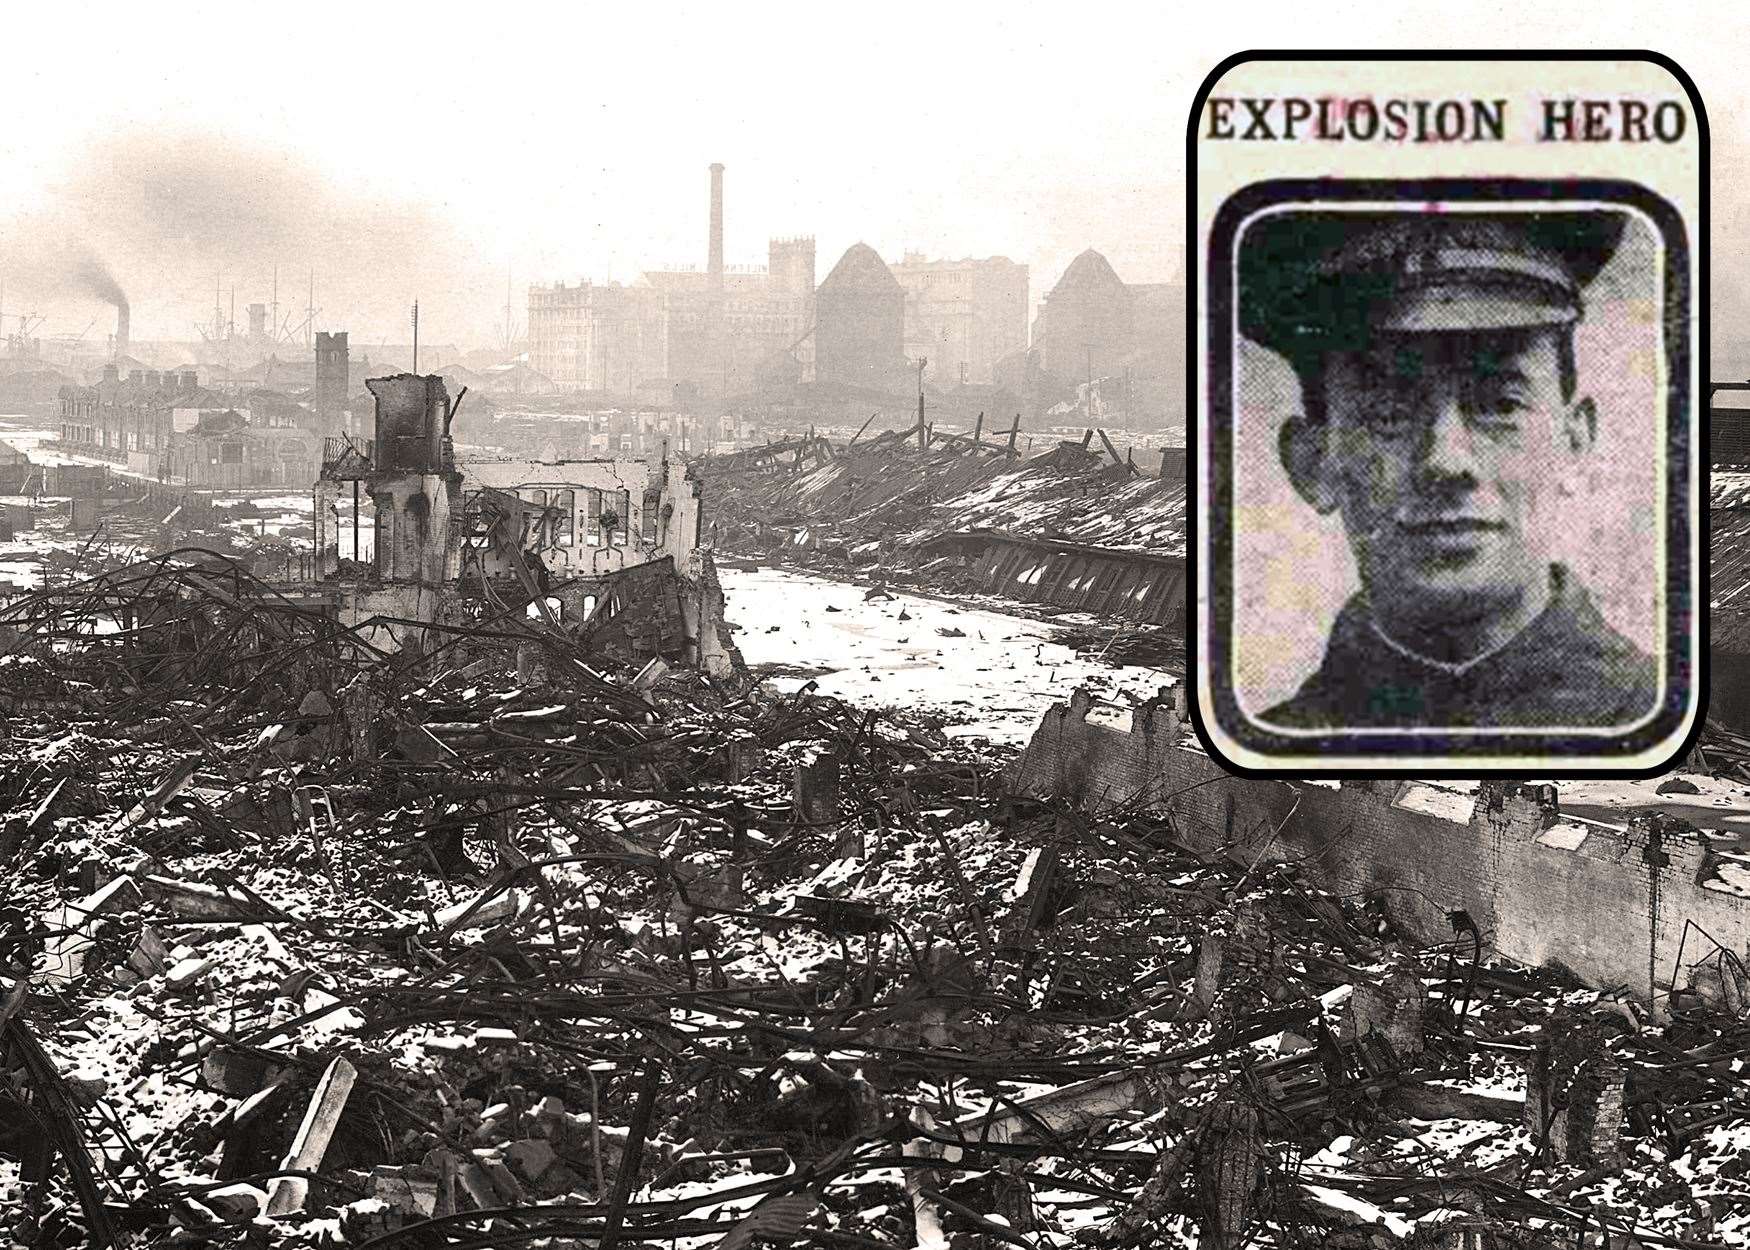 The aftermath from the explosion with an inset of Captain William Manson.